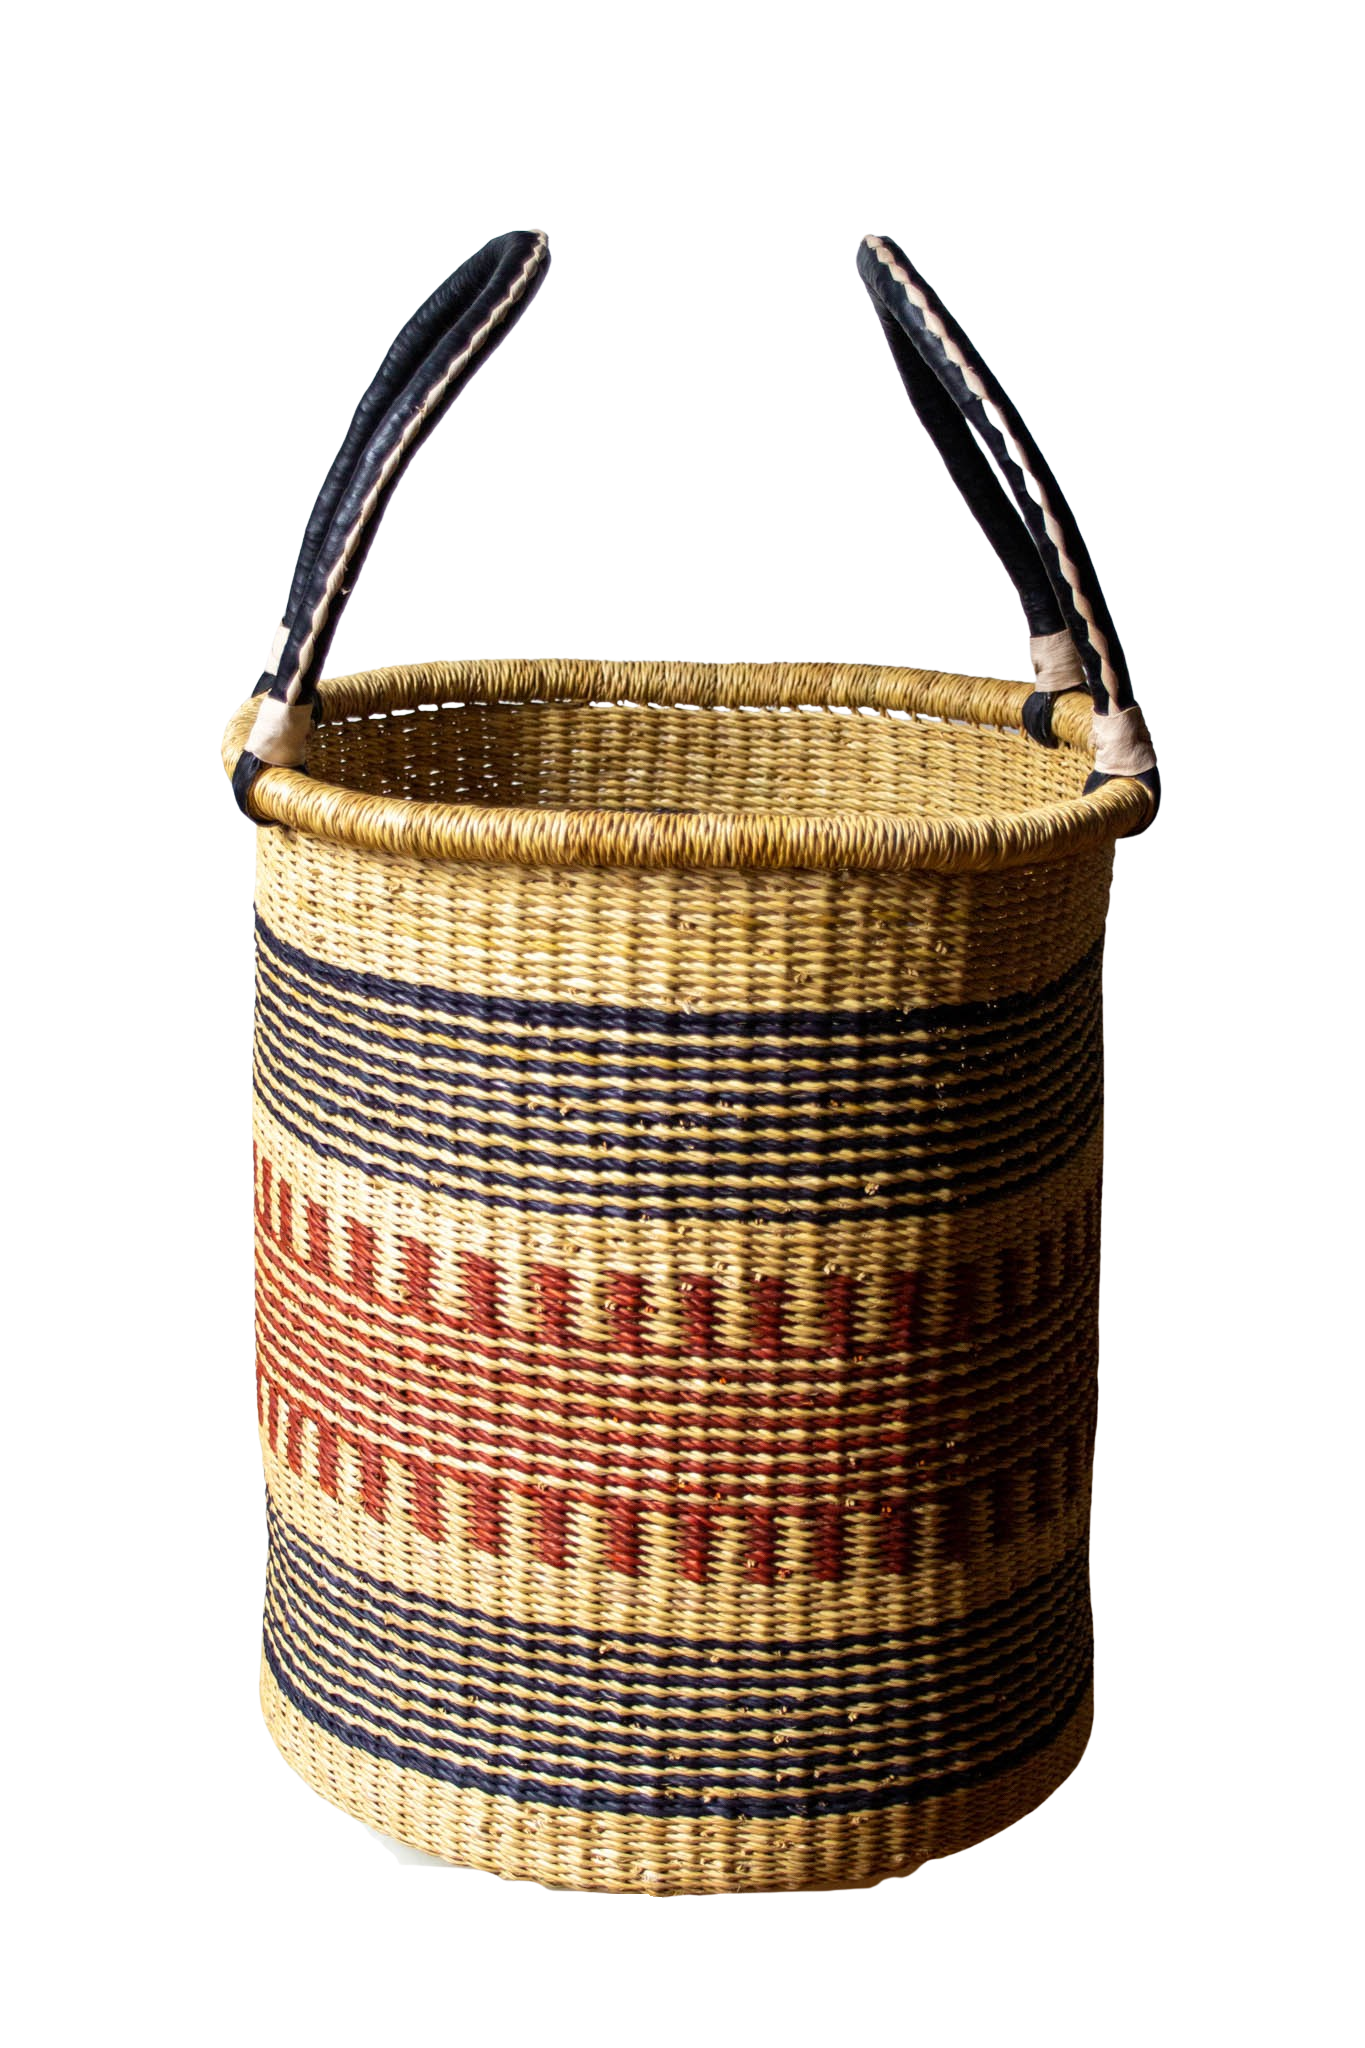 Laundry basket with black and maroon handles made of natural fiber 